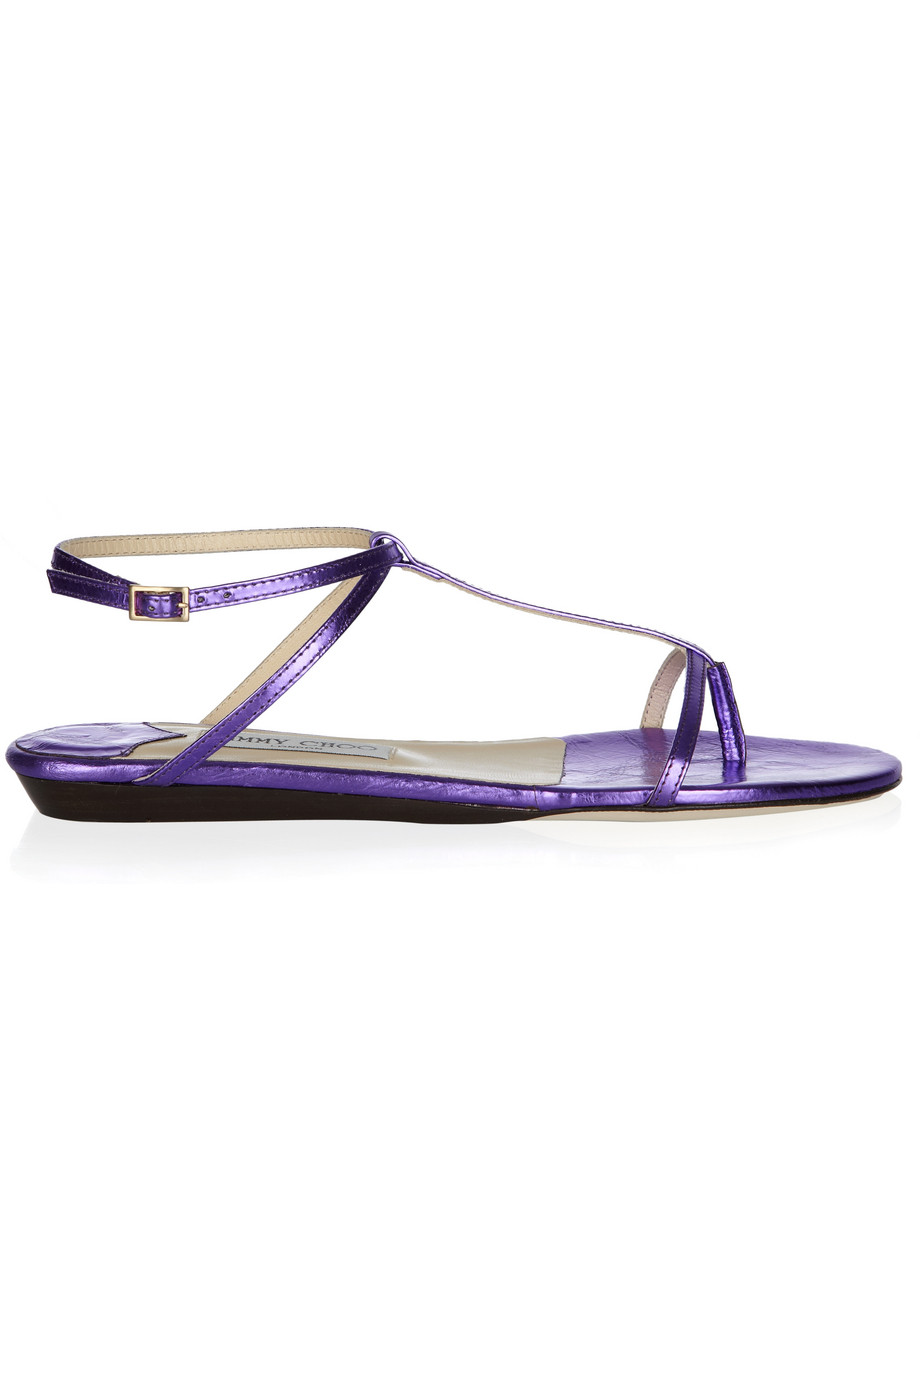 Lyst - Jimmy Choo Vernie Flat Leather Lace-up Sandal in Blue